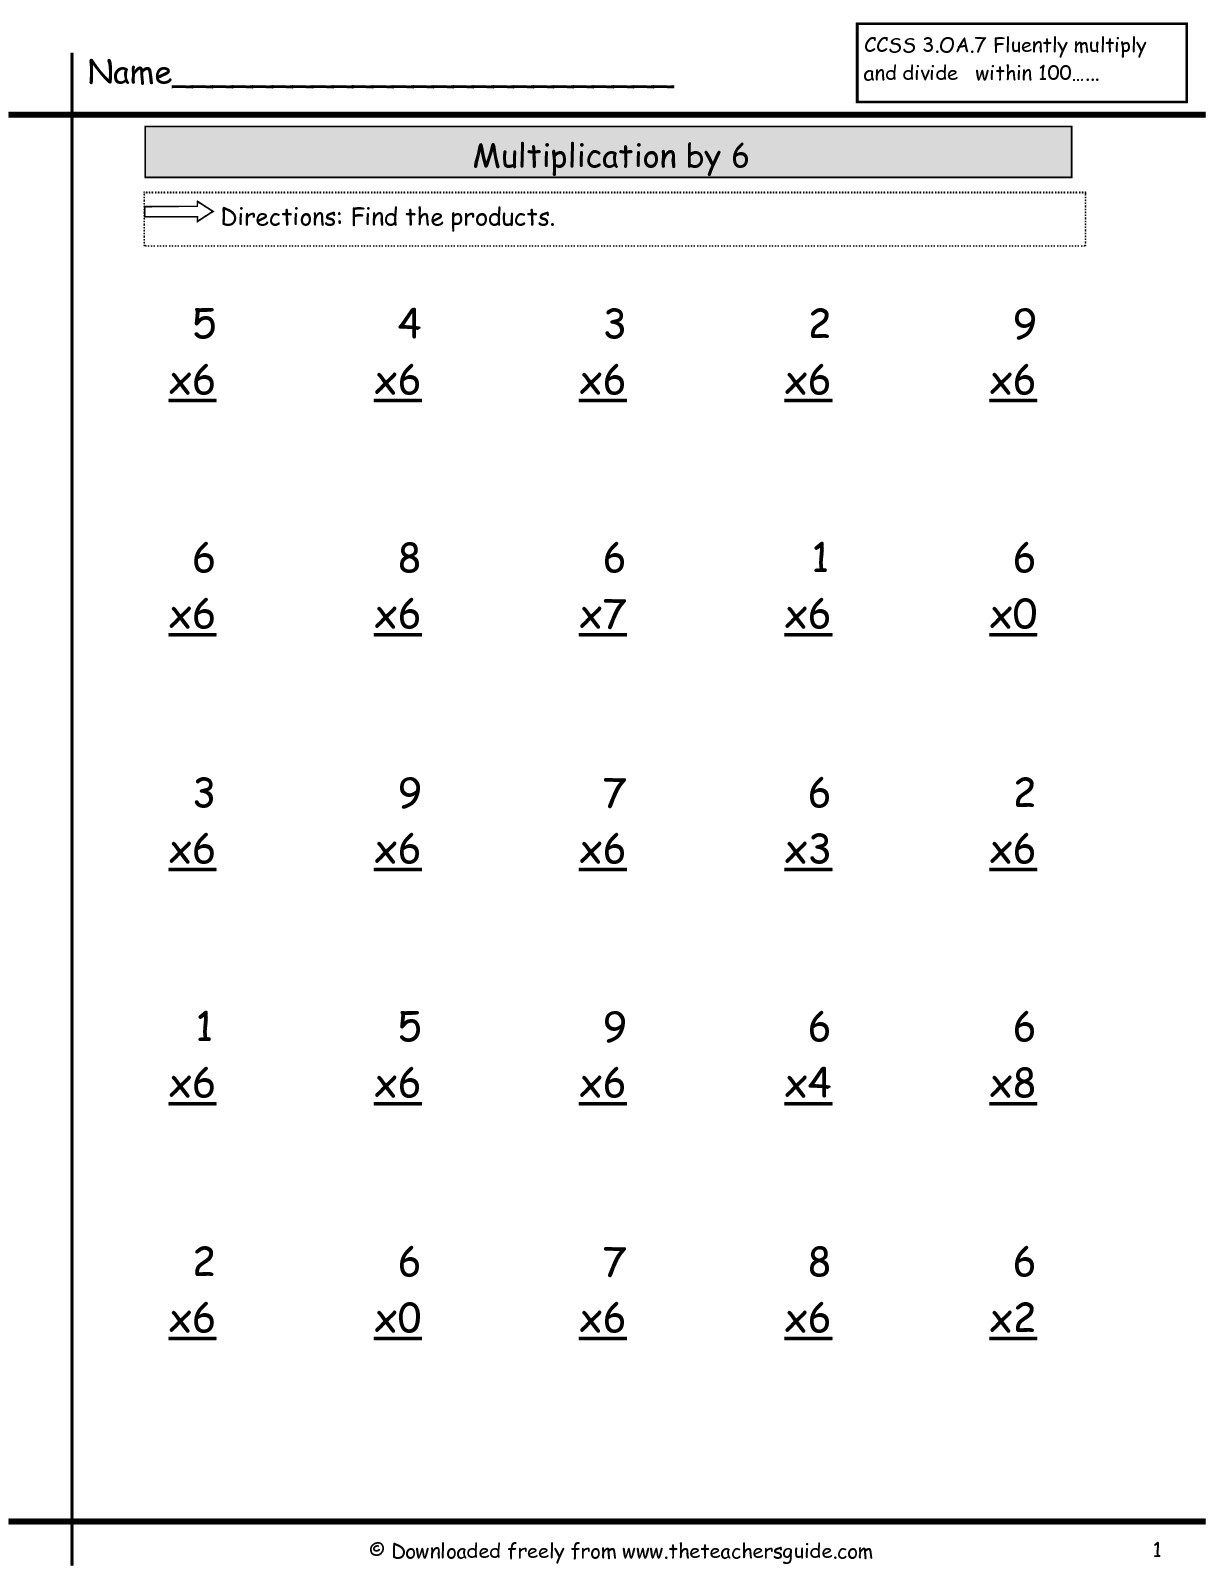 Multiplication Facts Worksheets From The Teacher&amp;#039;s Guide with regard to 6 Multiplication Printable